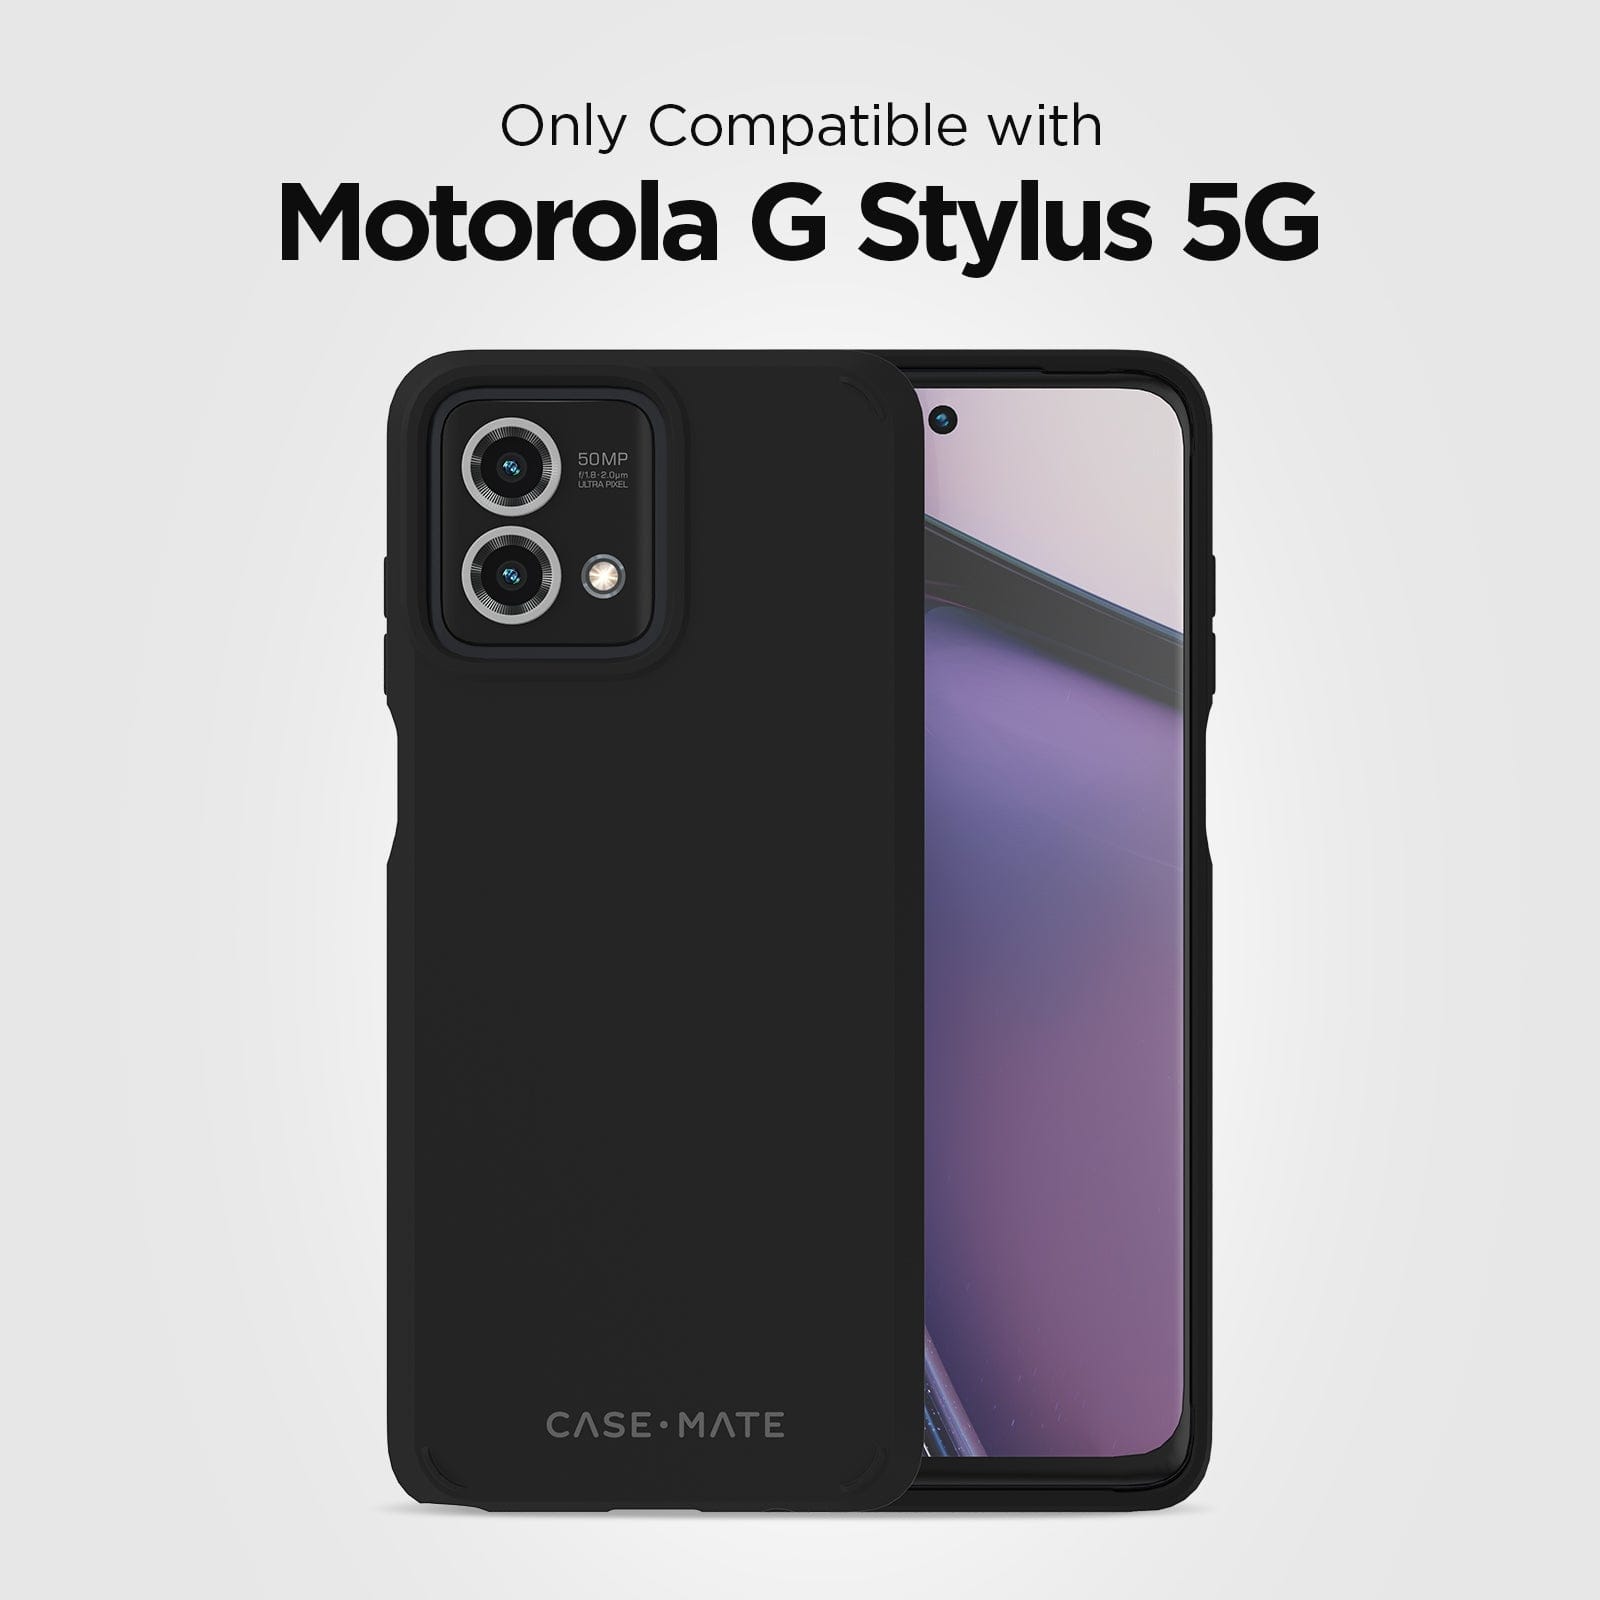 Only compatible with Motorola G Stylus 5G